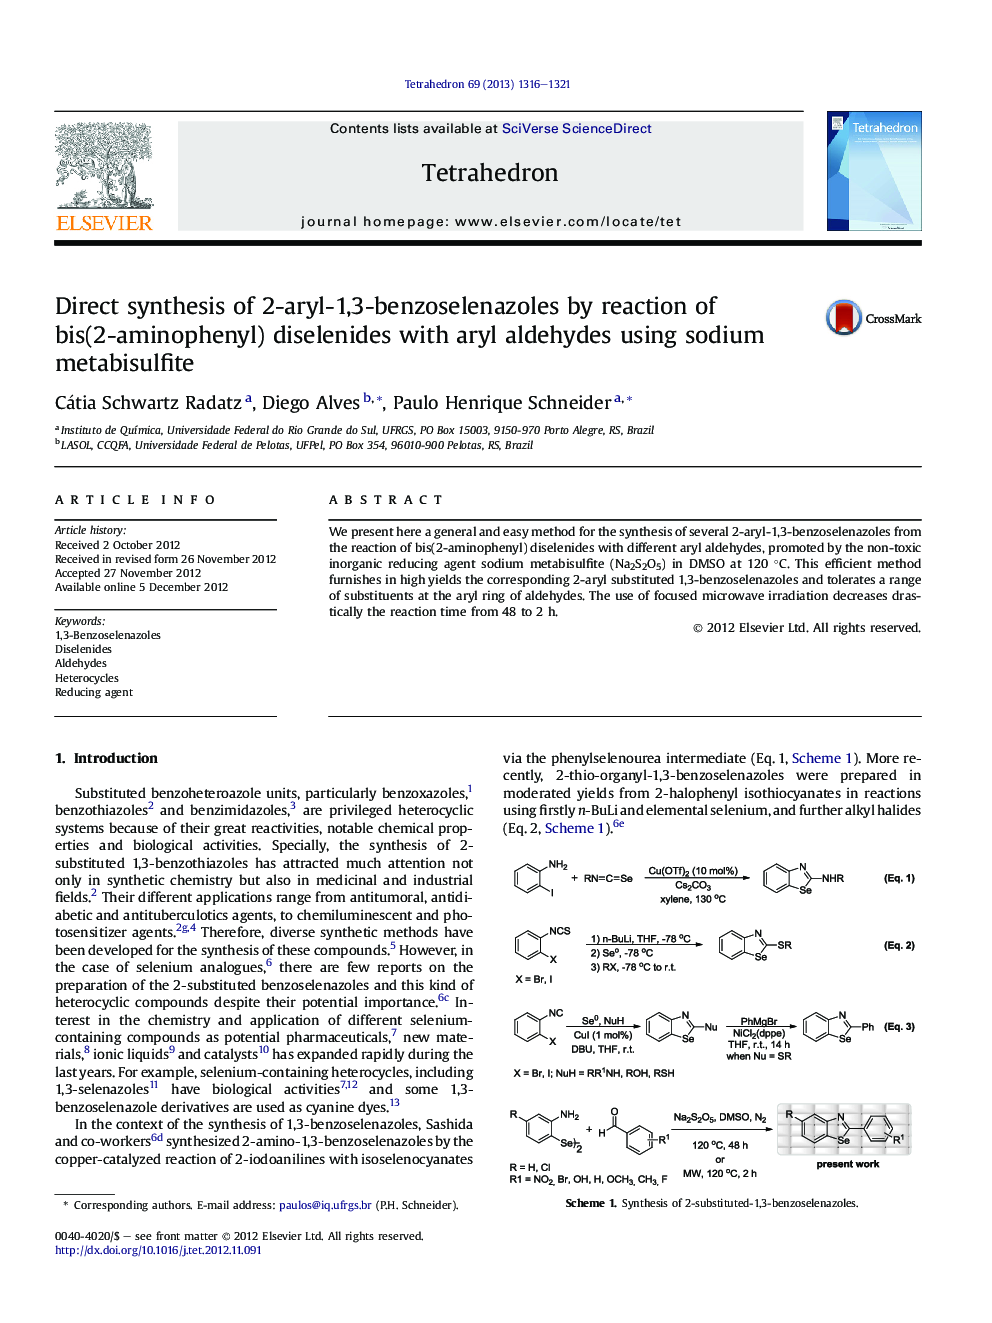 Direct synthesis of 2-aryl-1,3-benzoselenazoles by reaction of bis(2-aminophenyl) diselenides with aryl aldehydes using sodium metabisulfite